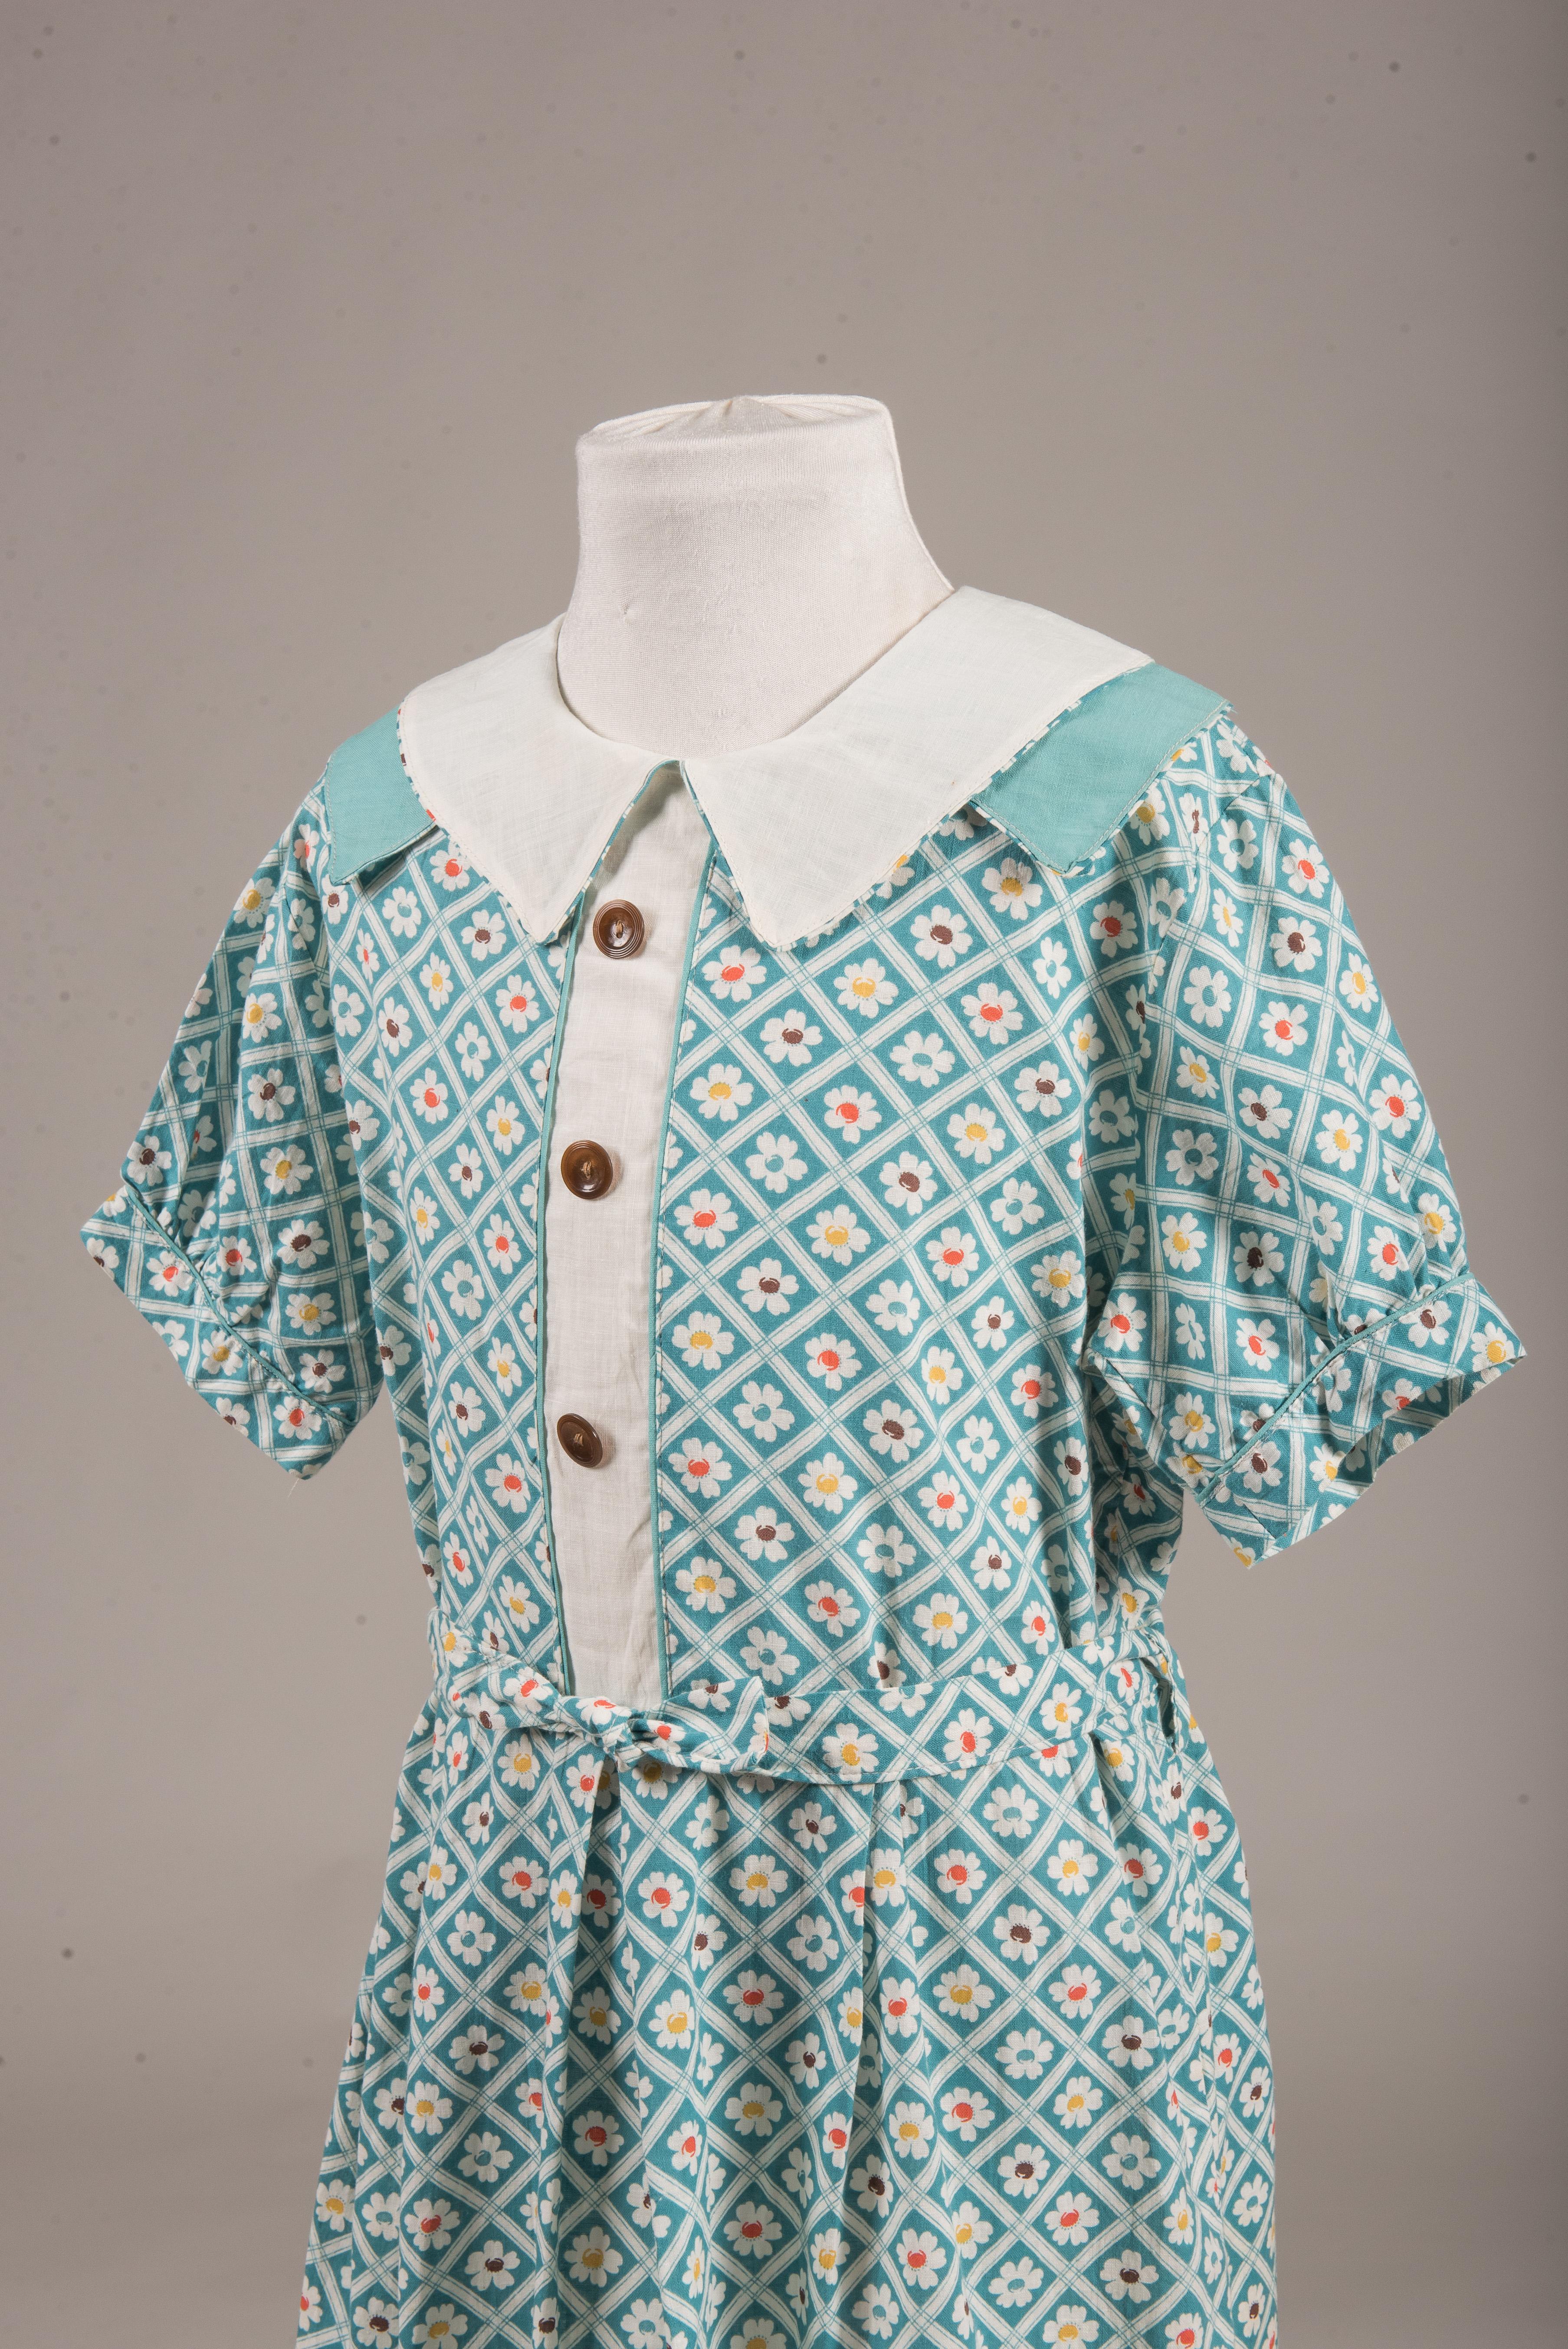 Dress on exhibit at NSU library